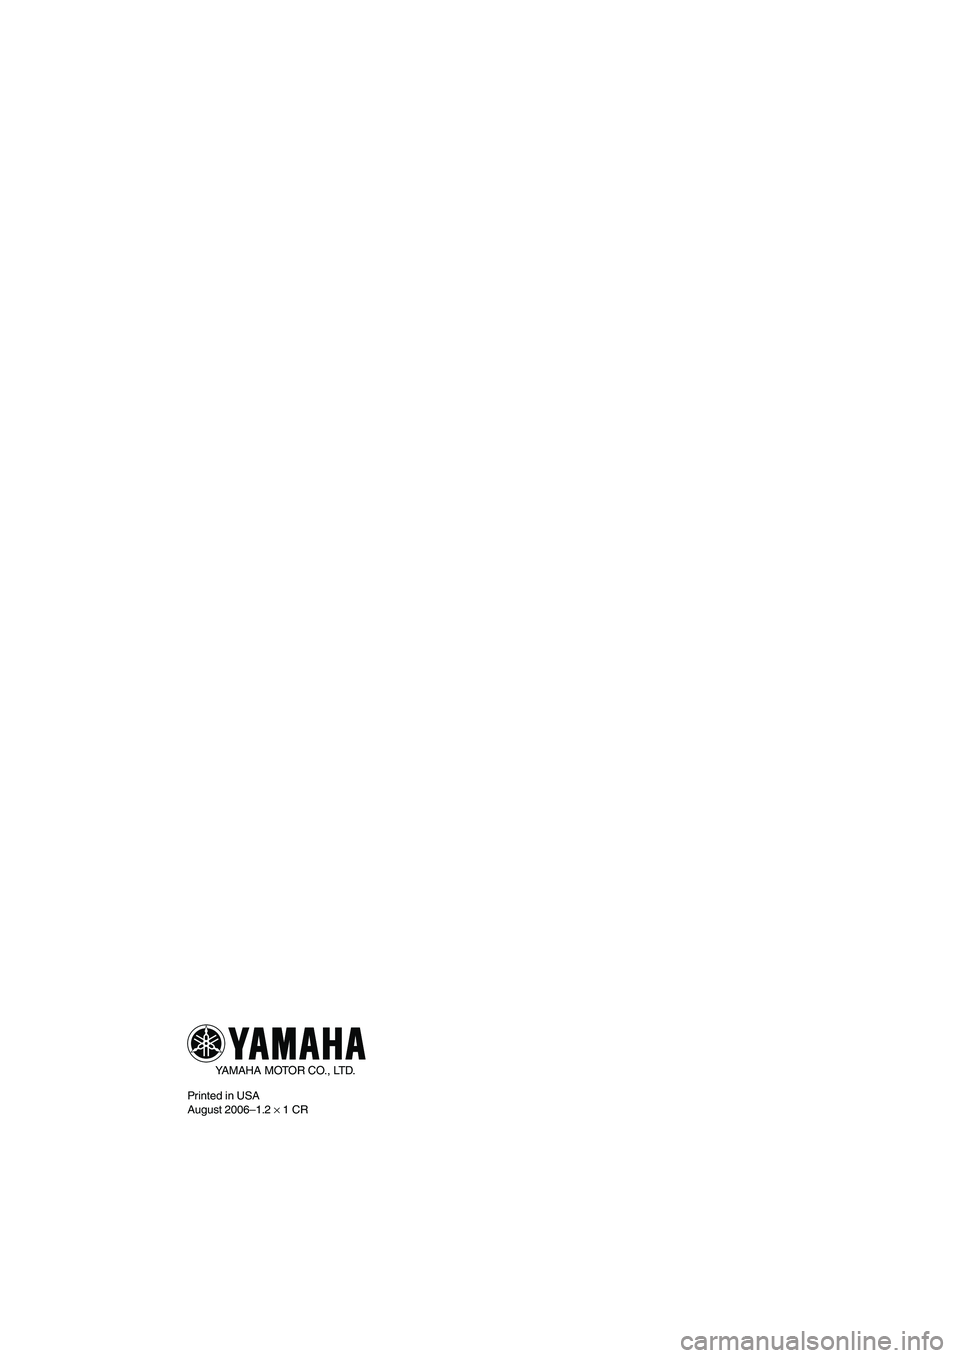 YAMAHA VX SPORT 2007  Owners Manual YAMAHA MOTOR CO., LTD.
Printed in USA
August 2006–1.2 × 1 CR
UF1K72E0.book  Page 1  Wednesday, August 2, 2006  10:43 AM 